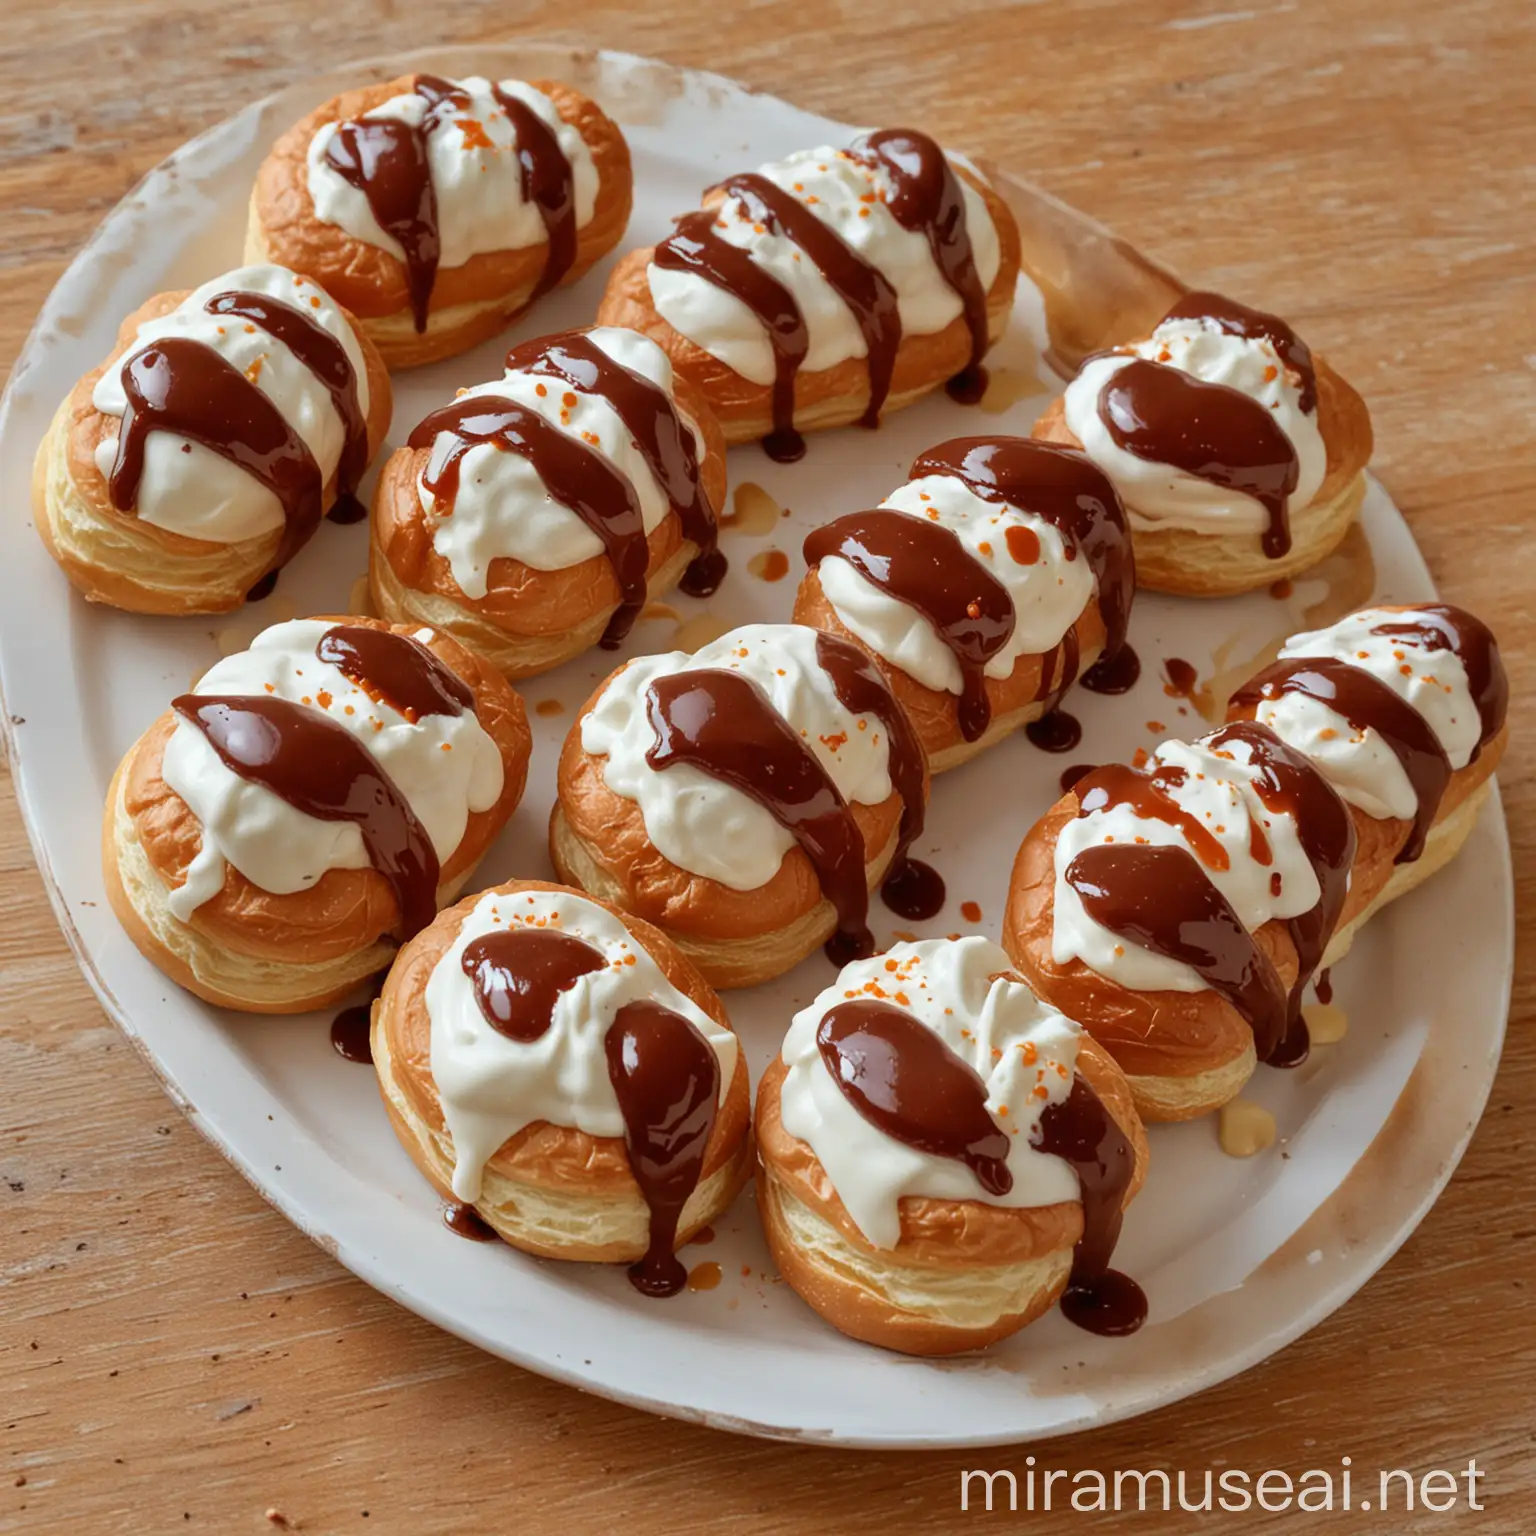 Chocolate clair Filled with Bchamel Sauce Dipped in Barbecue Sauce